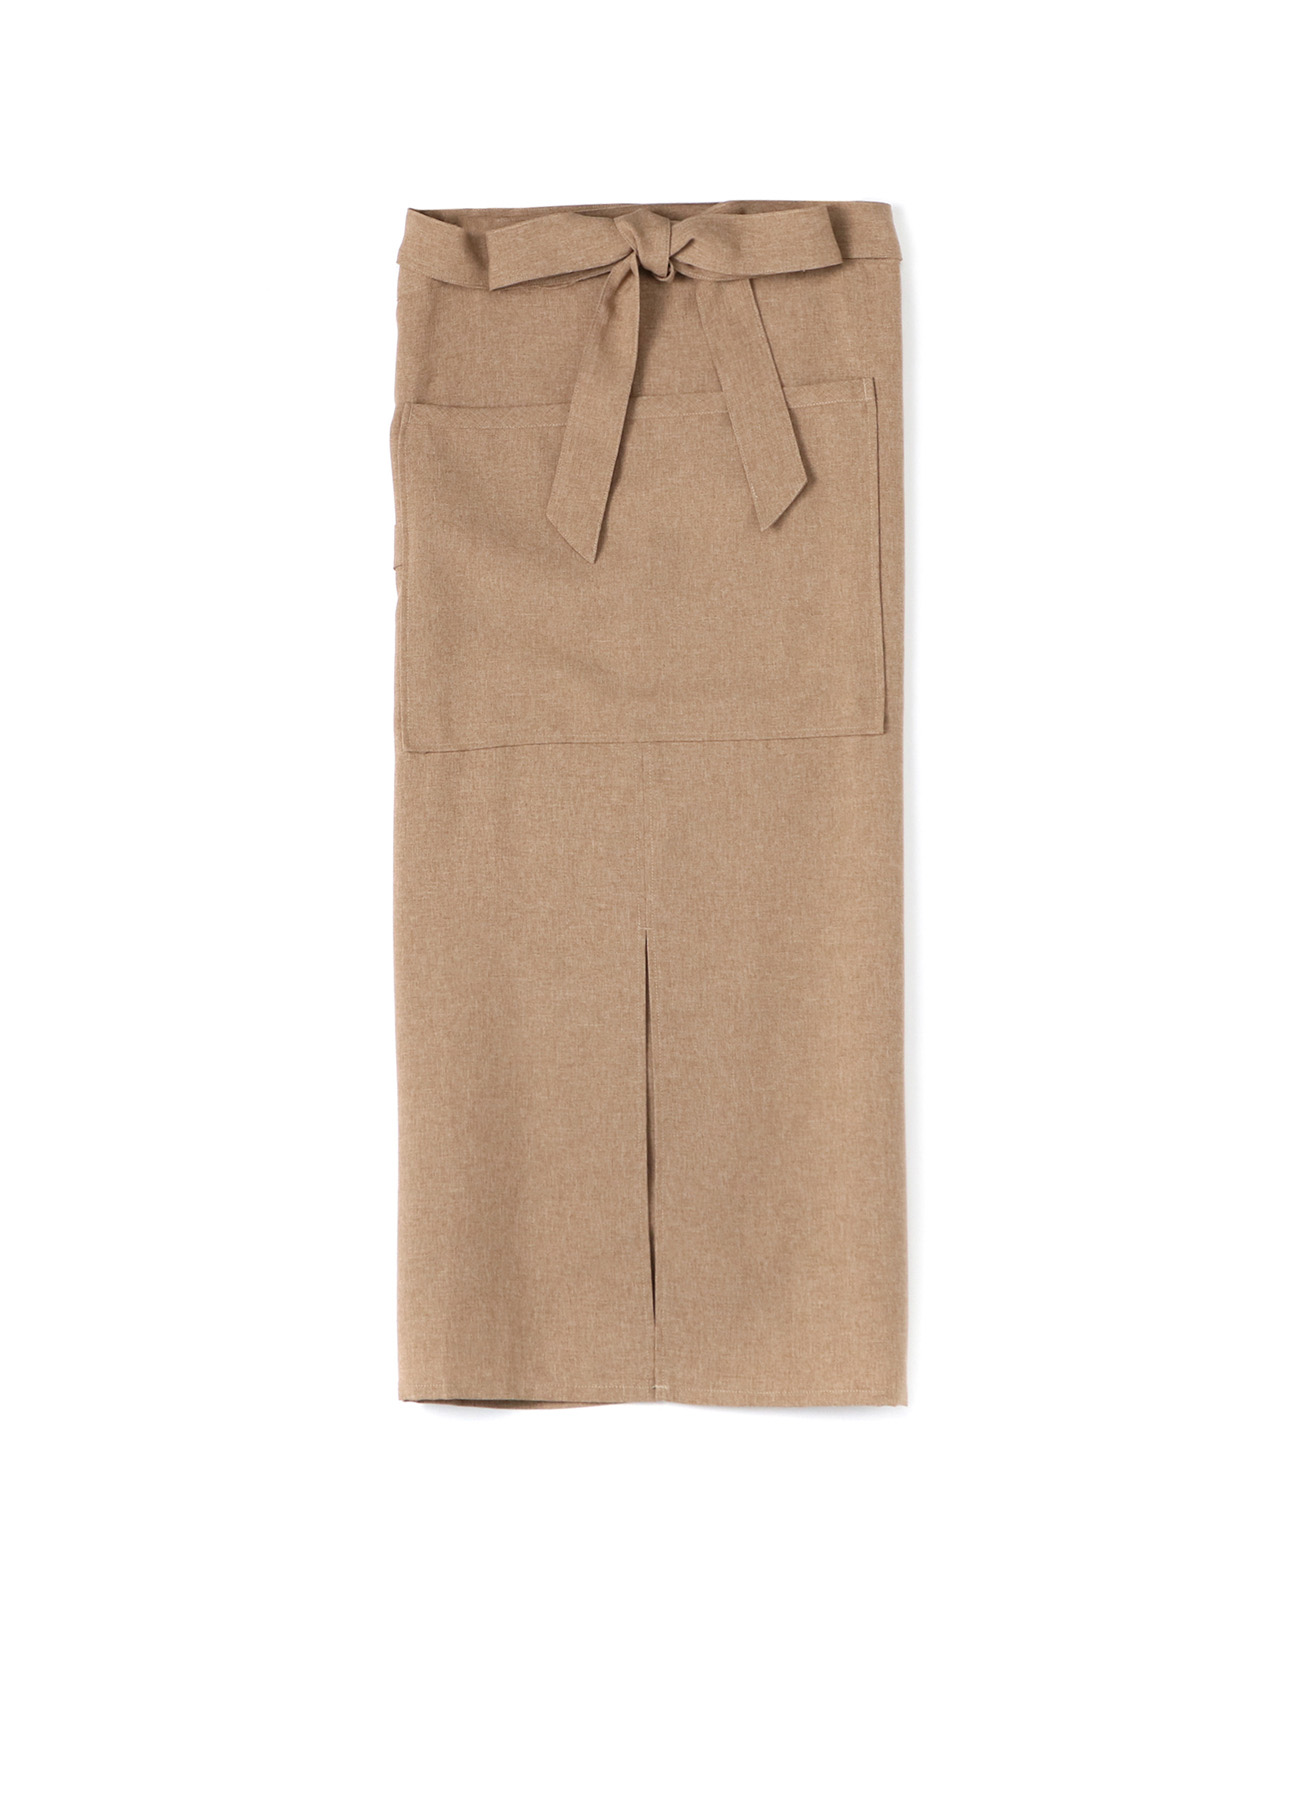 POLYESTER CHAMBRAY SOMMELIER APRON